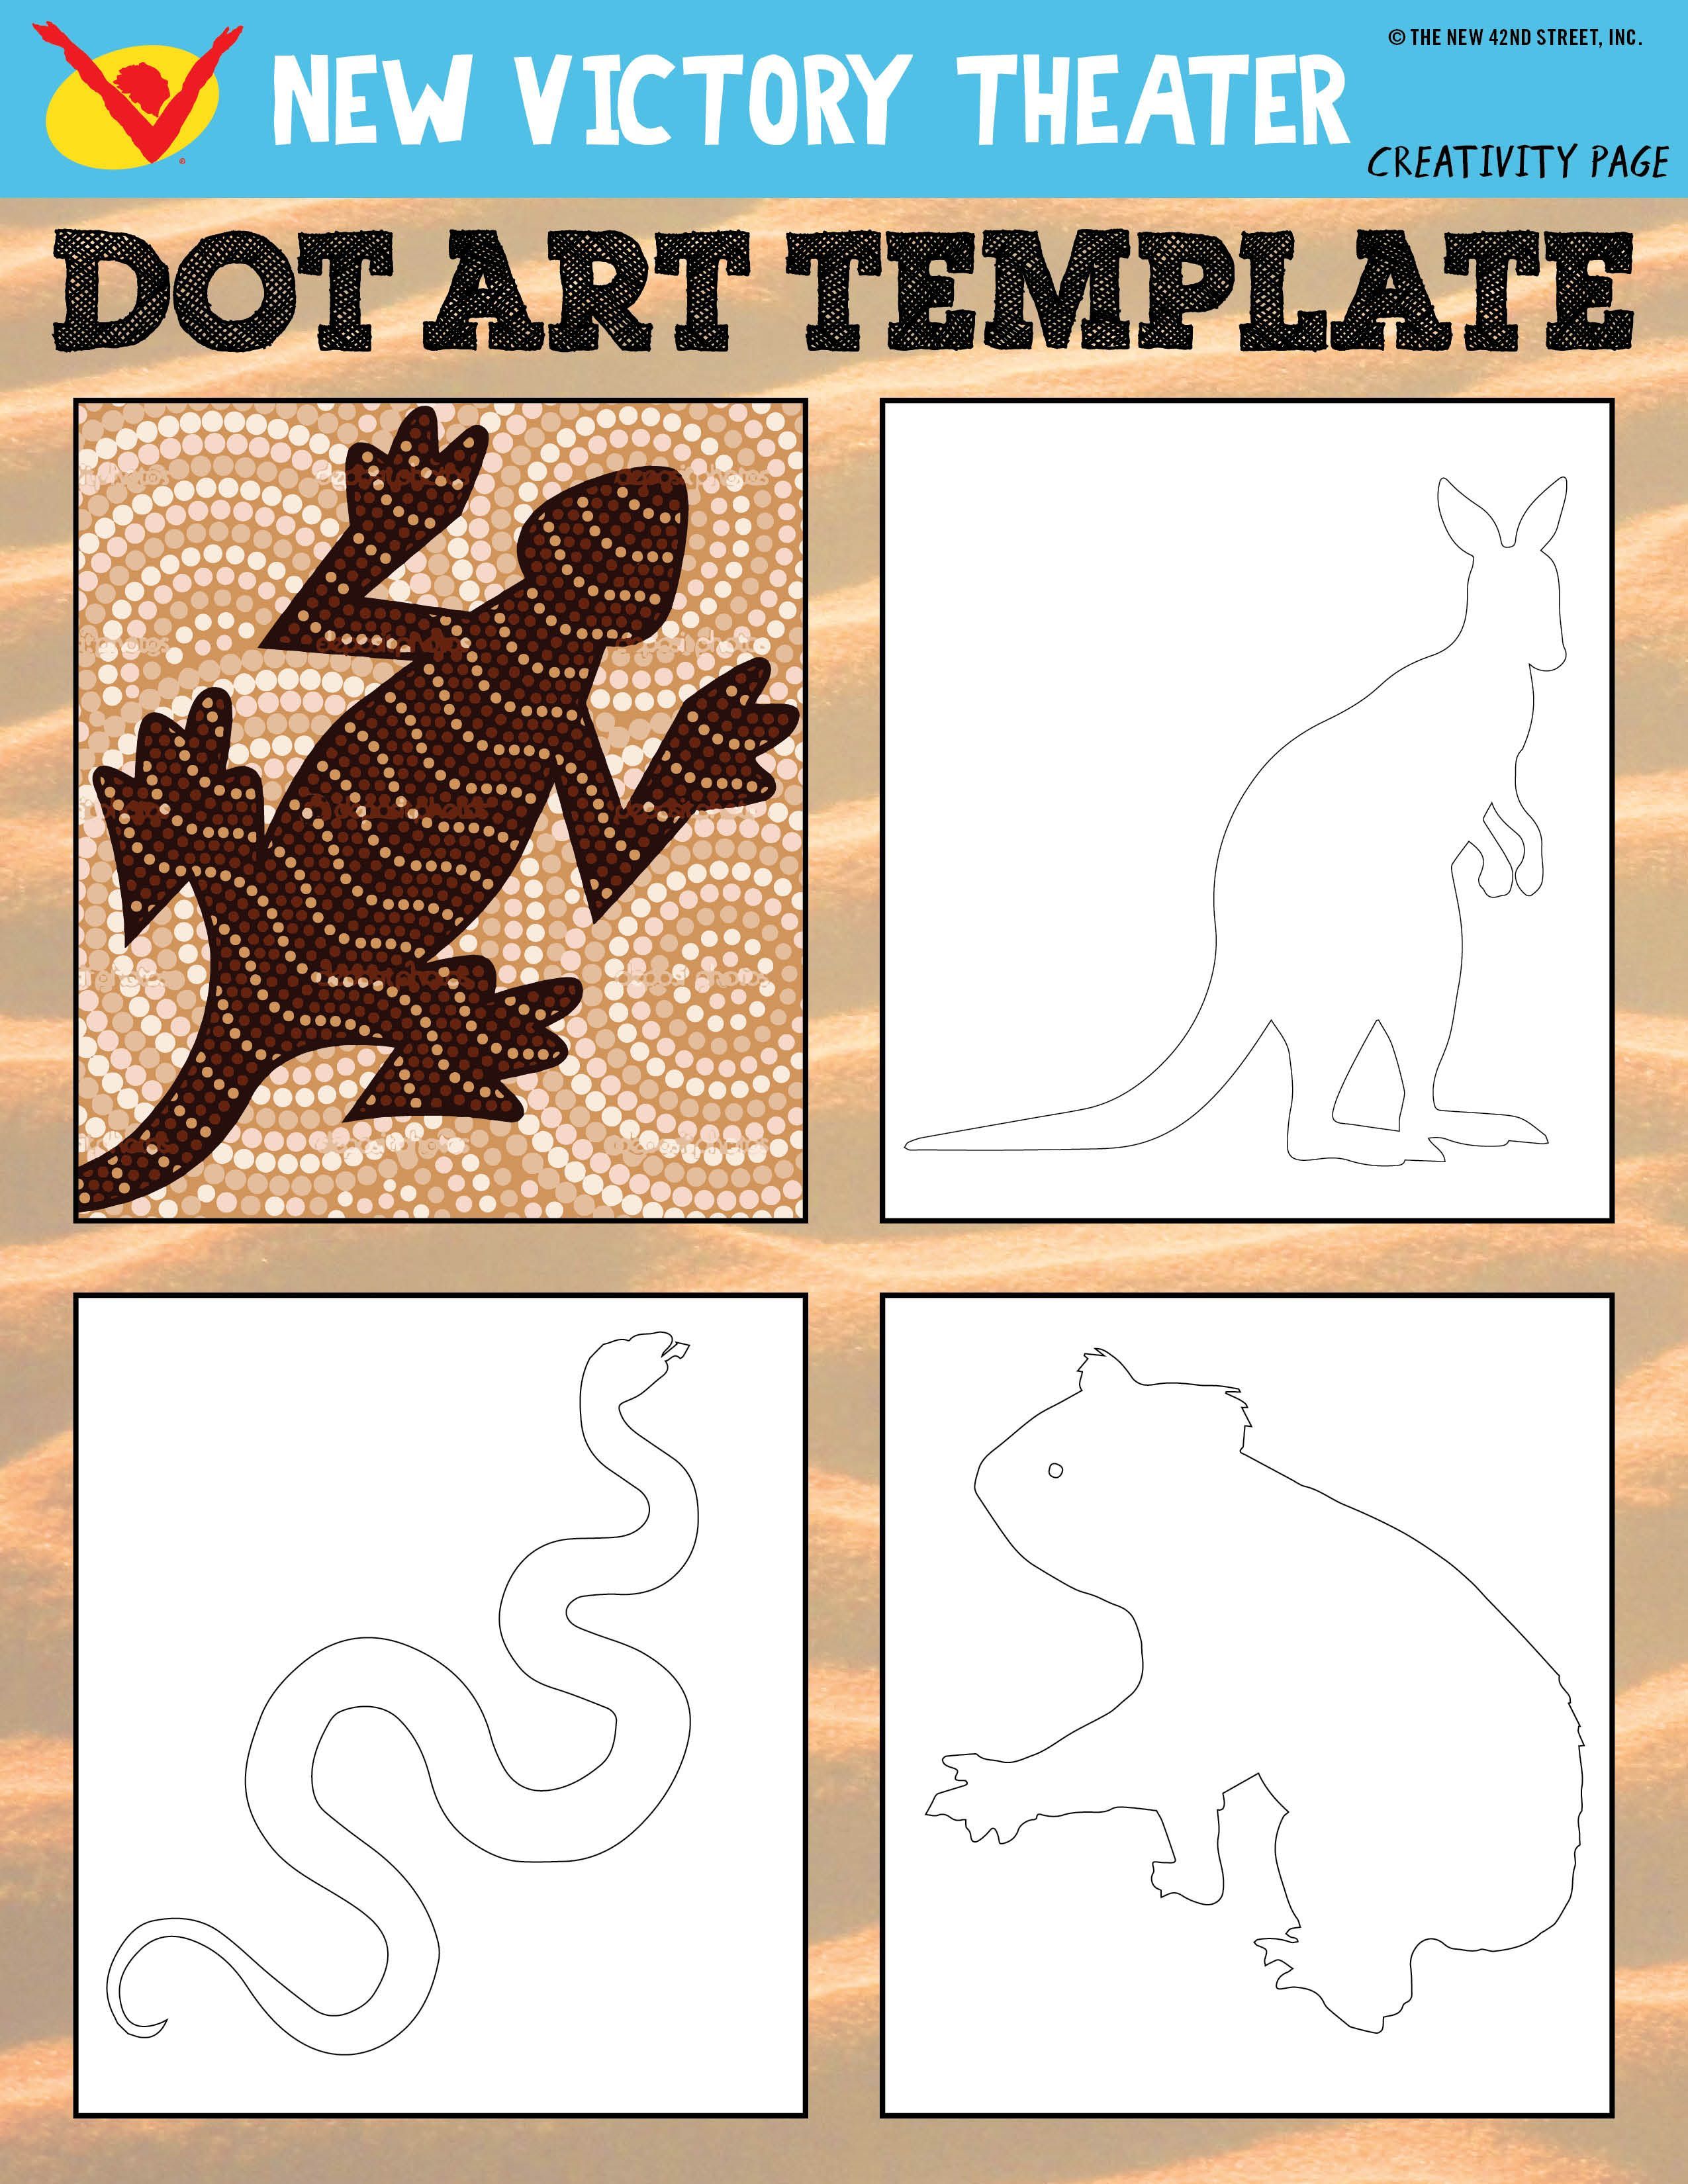 Learn about traditional Aboriginal art and try it out yourself with this printable worksheet inspired by SALTBUSH at the #newvic!